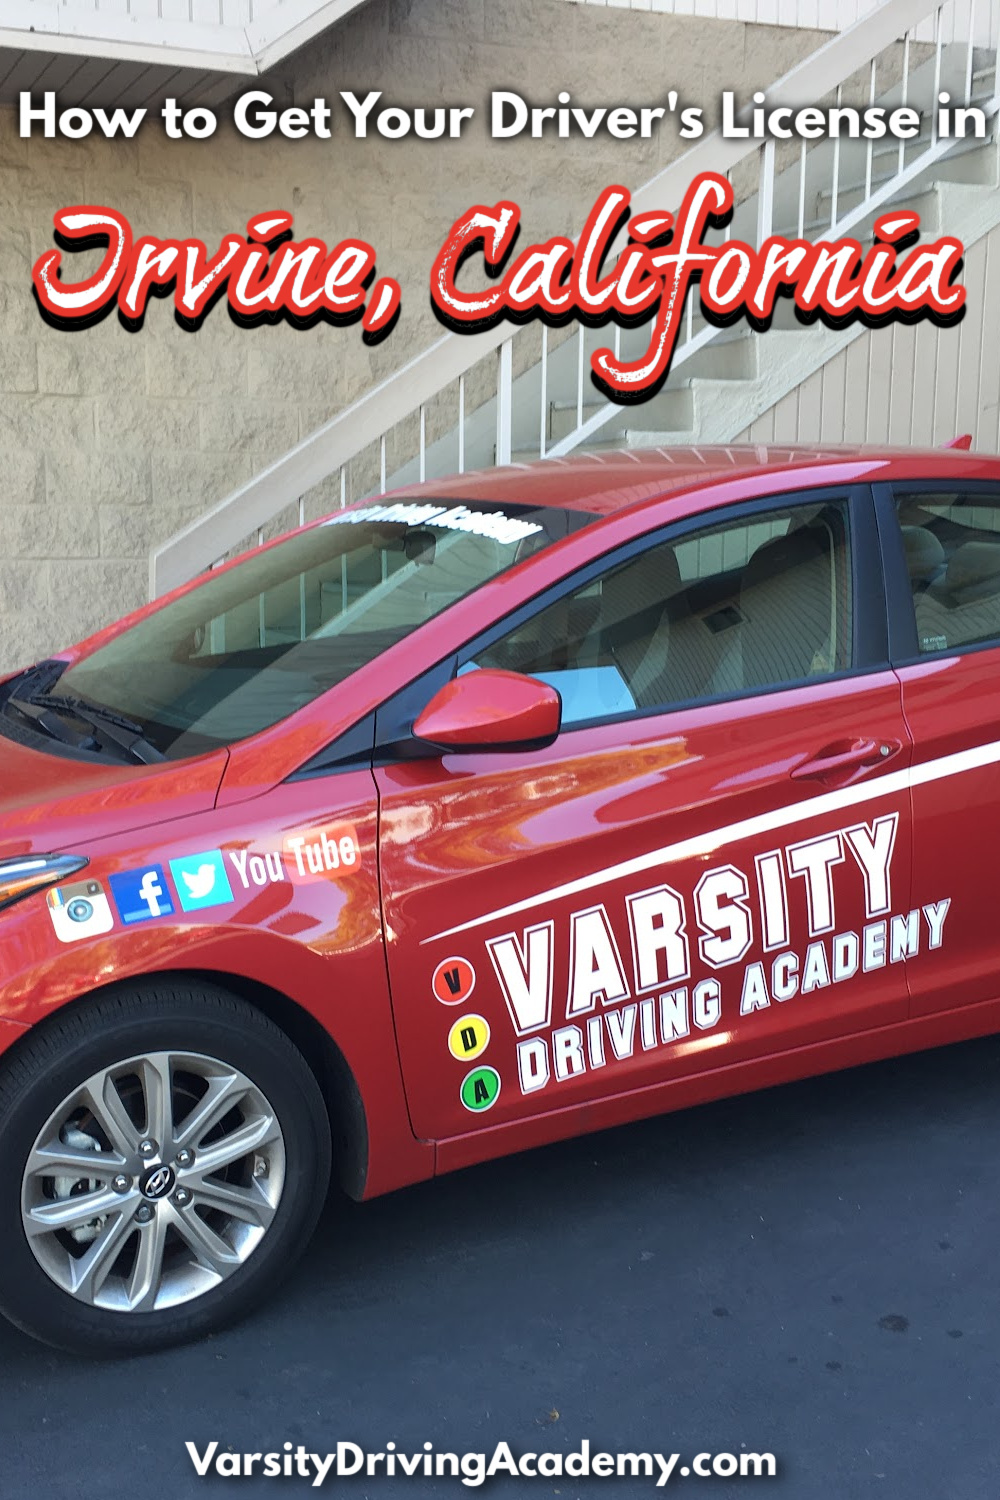 The first step to driving off into the sunset with a new driver’s license is learning how to get your driver’s license in Irving California.